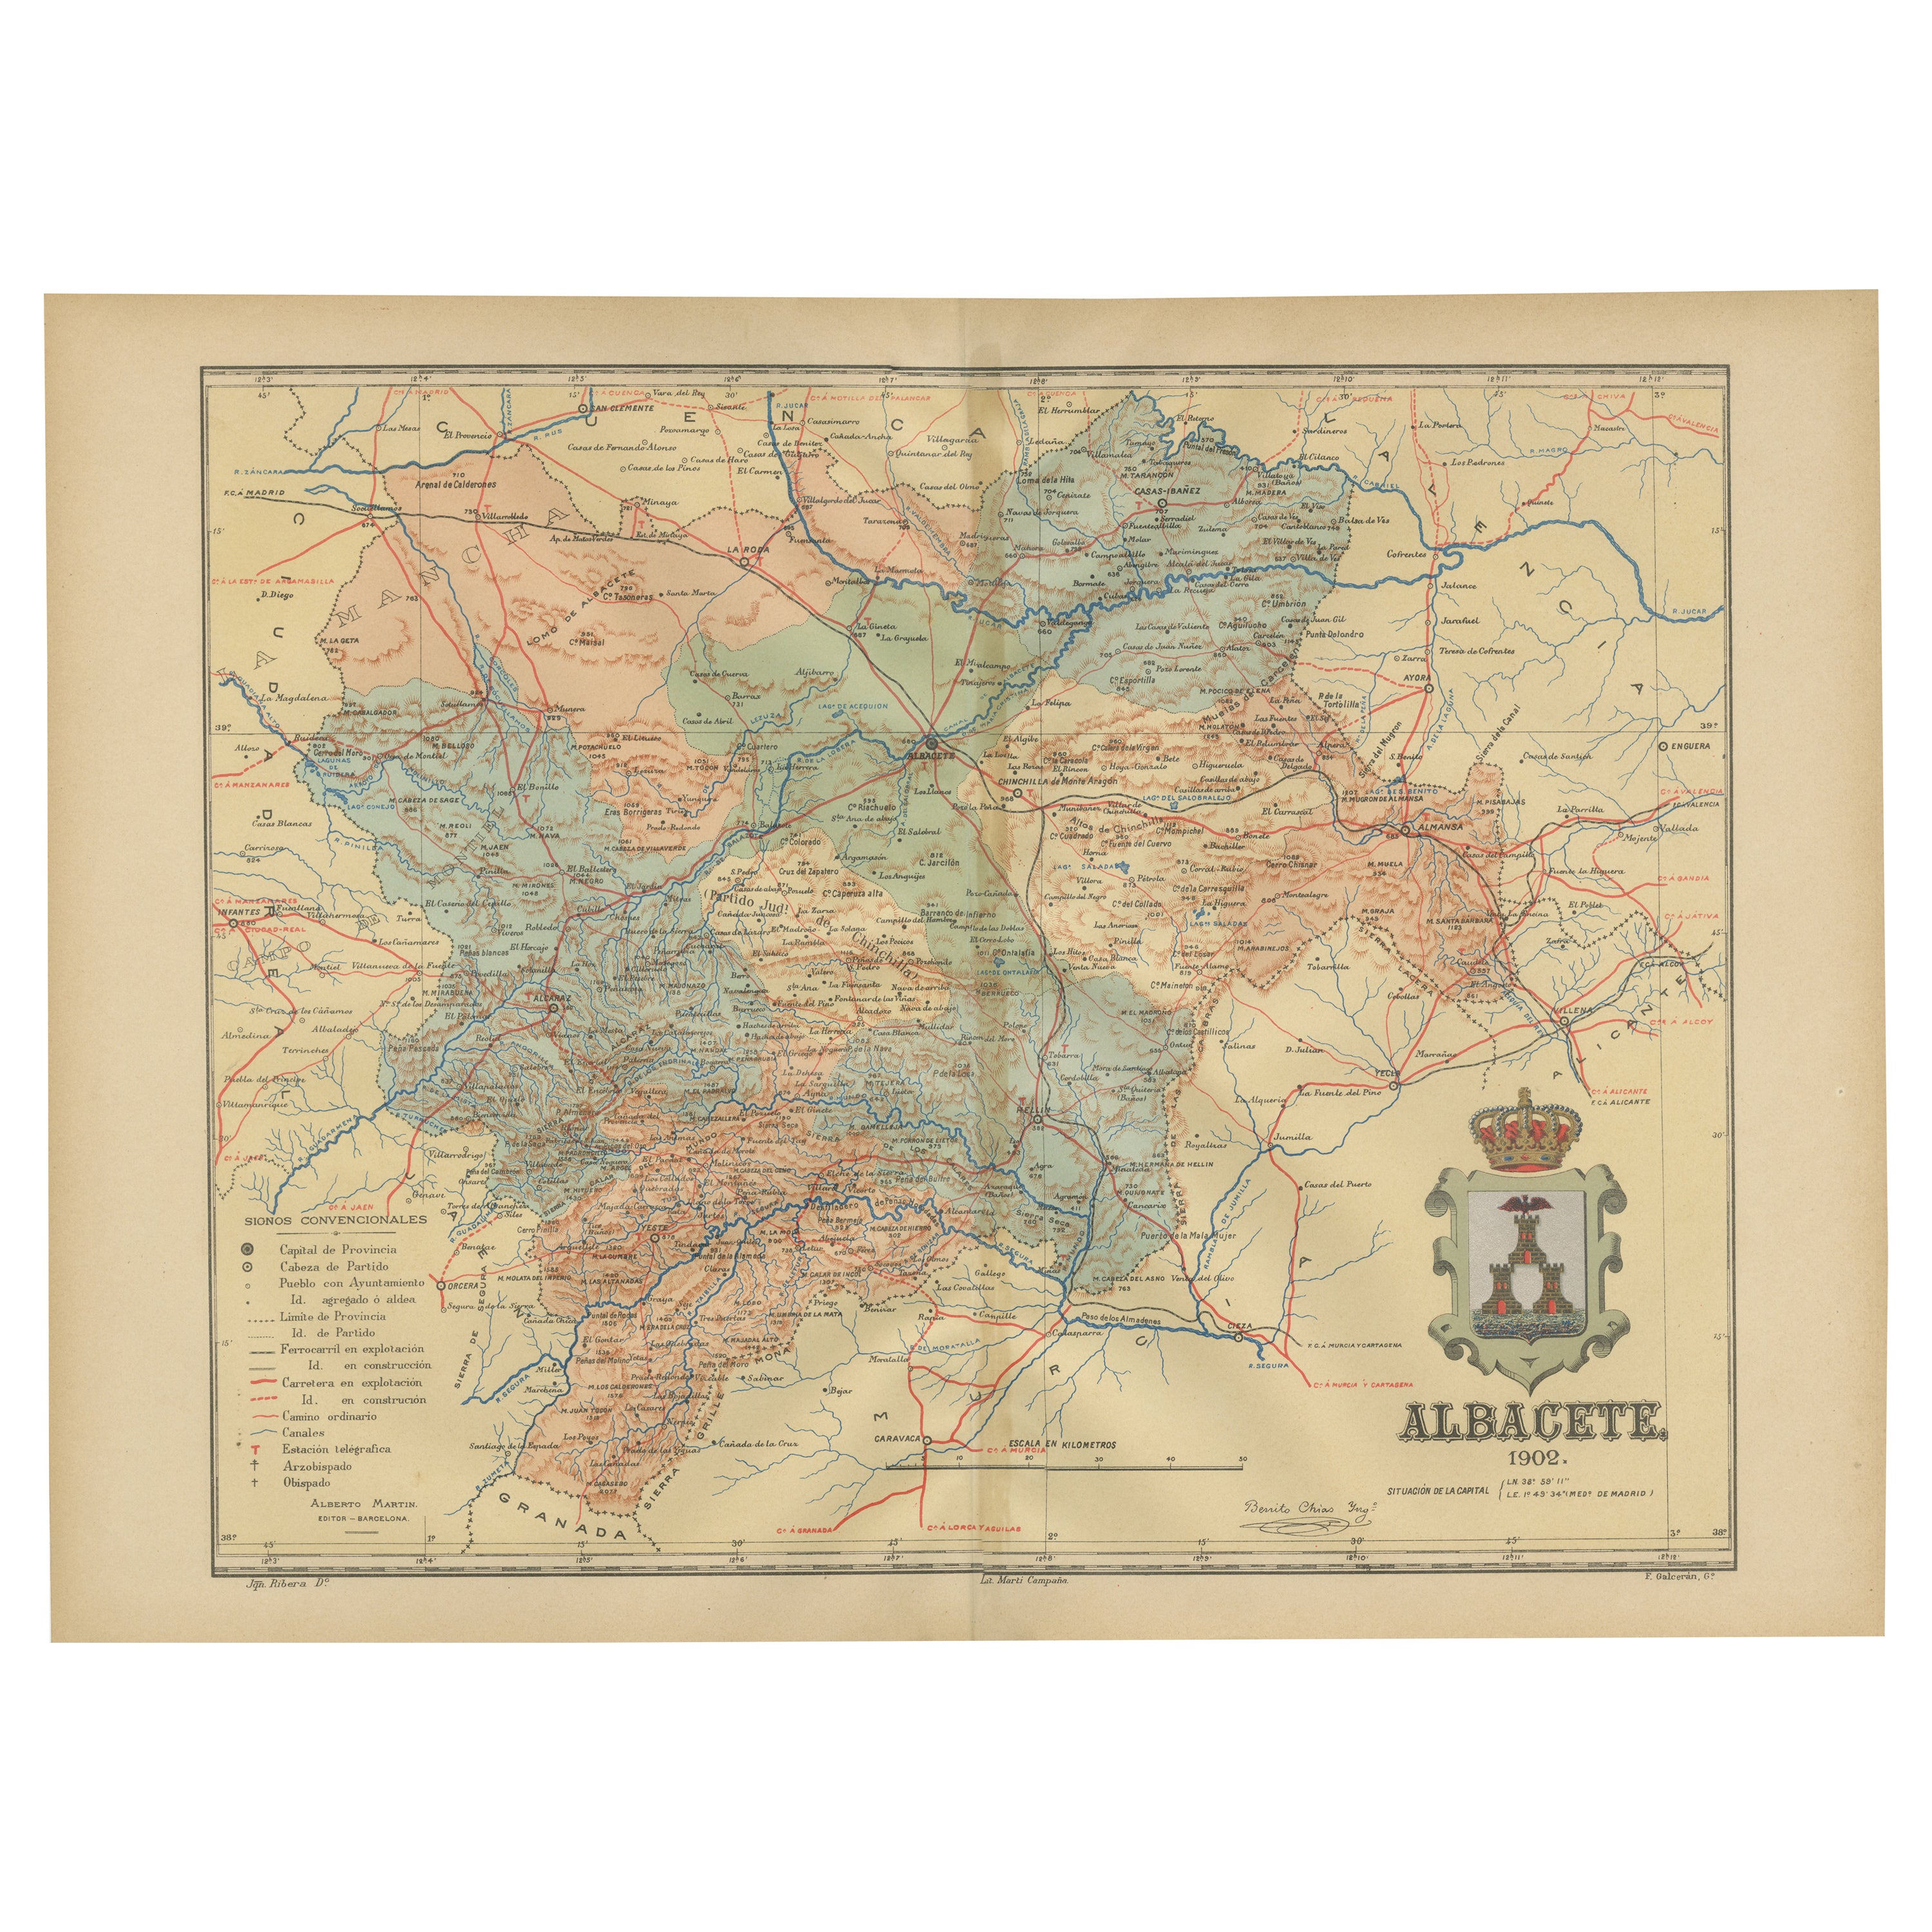 Albacete, Spain - 1902: A Cartographic Depiction of Landscape and Infrastructure For Sale